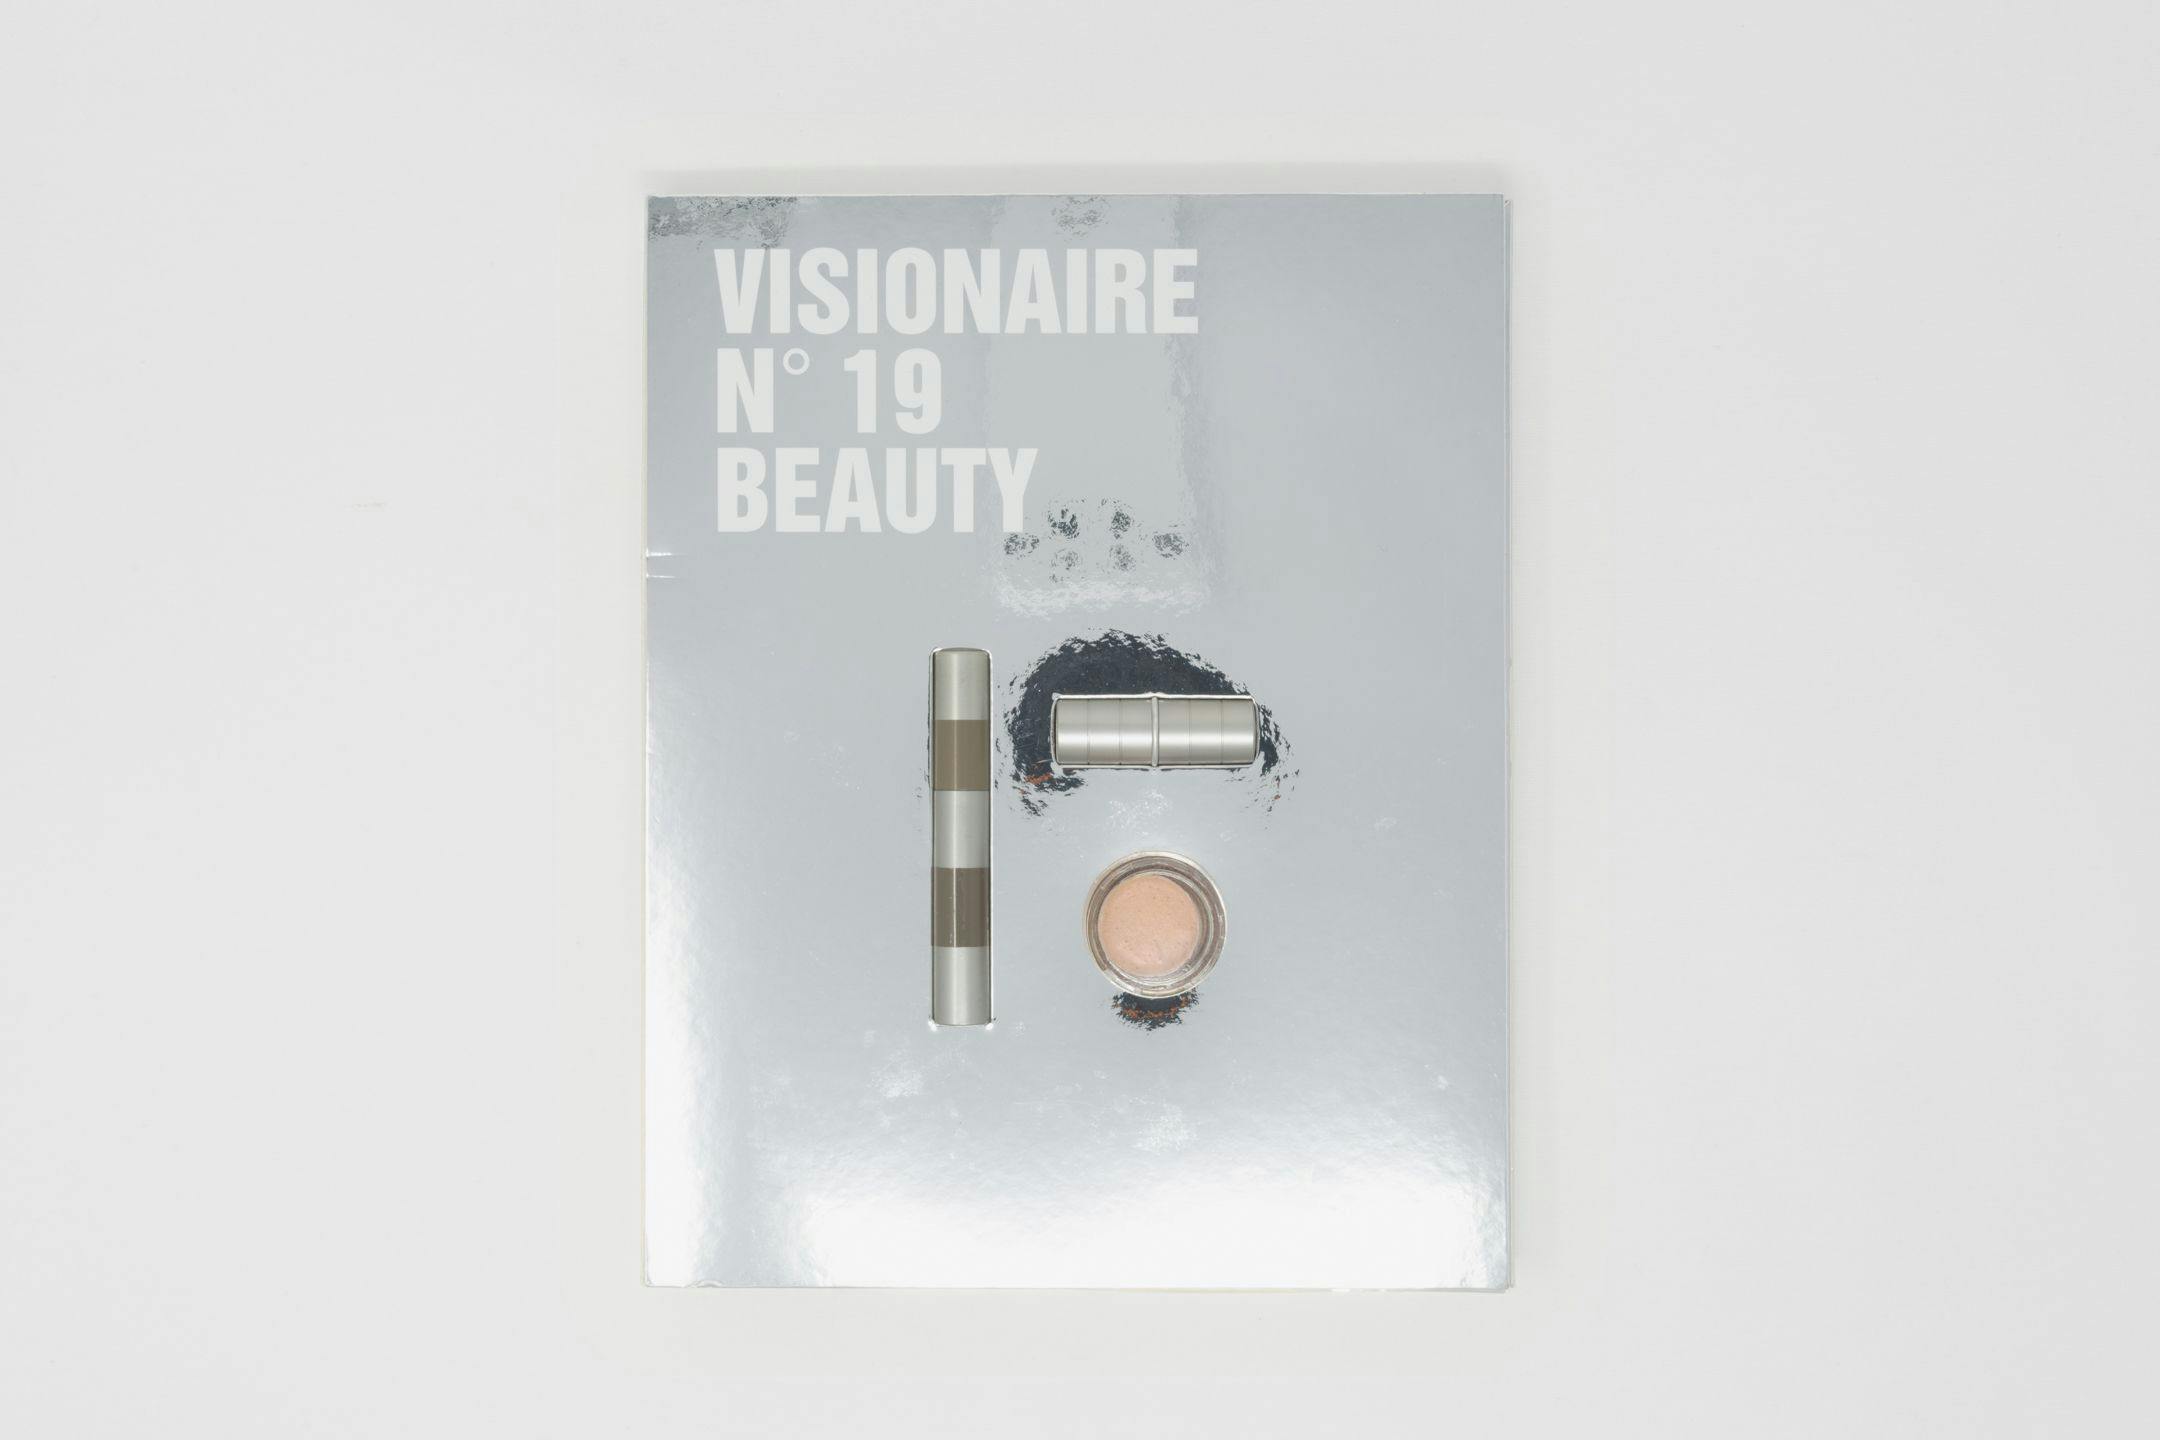 VISIONAIRE NO. 18: FASHION SPECIAL (LOUIS VUITTON) by (VISIONAIRE). Gan,  Stephen, Cecilia Dean & James Kaliardos, Editors: As New Leather and Fabric  Portfolio (1996) First Edition 1/2500.